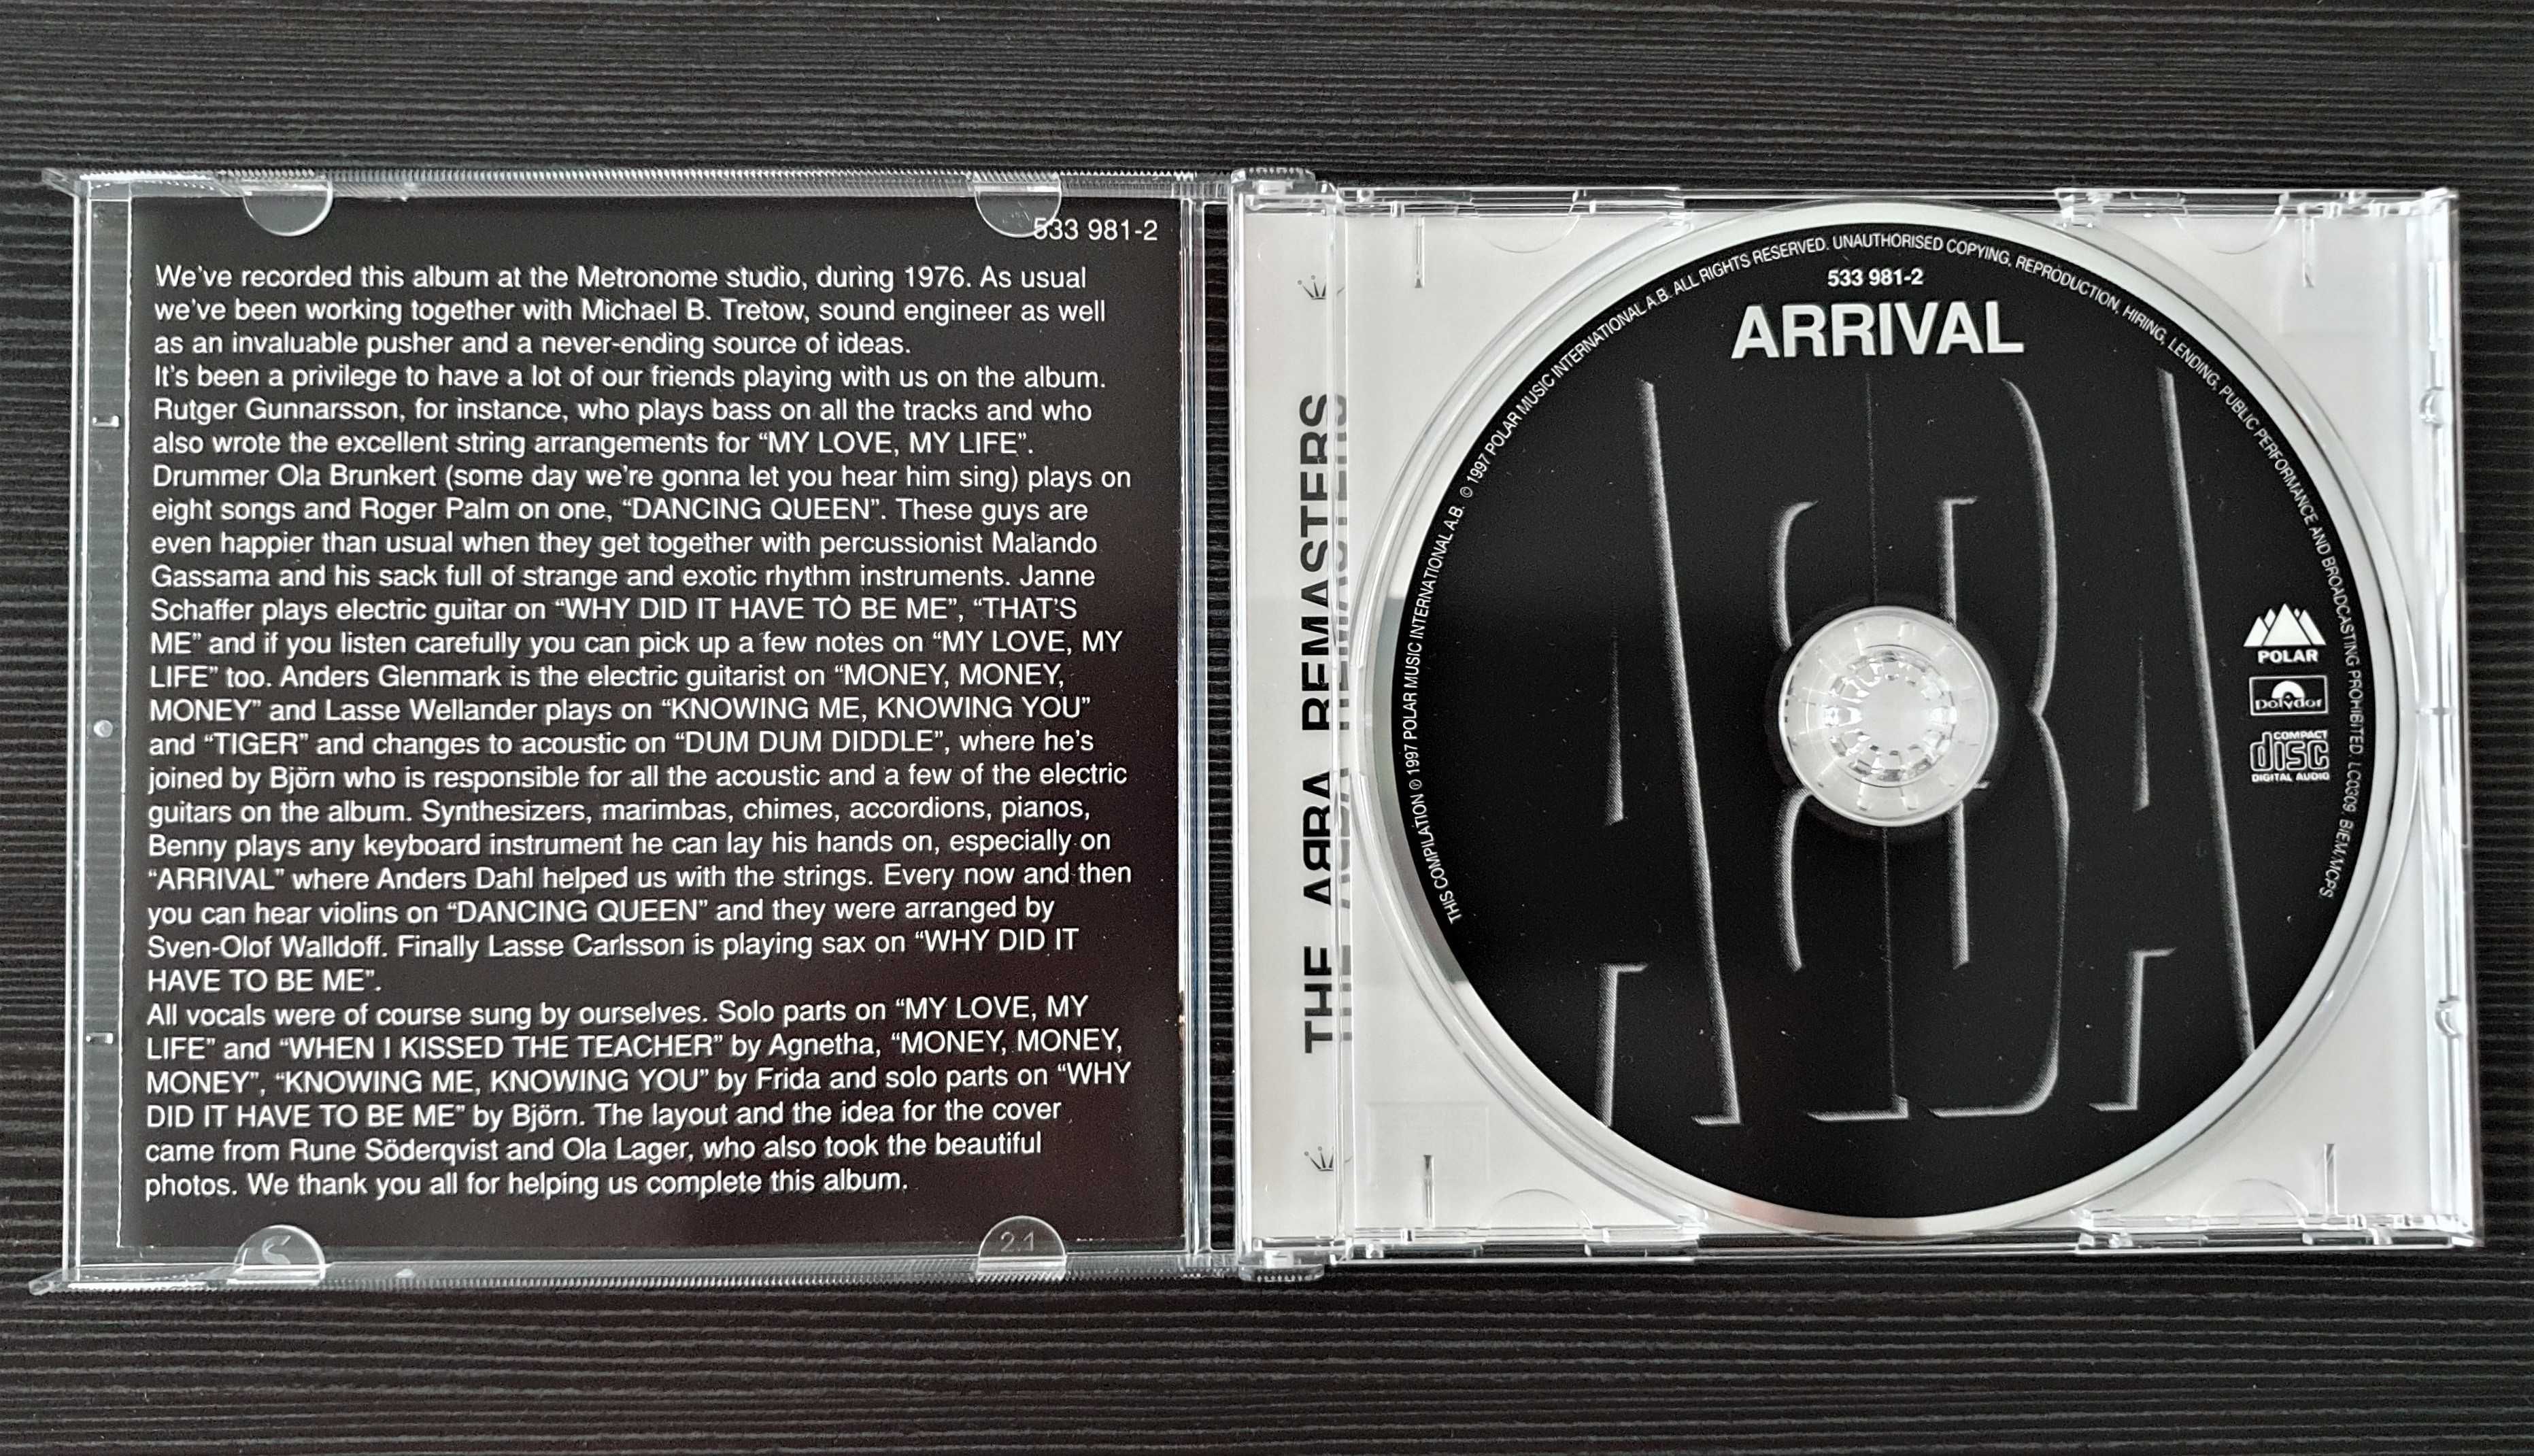 ABBA Arrival CD Remastered with additional track